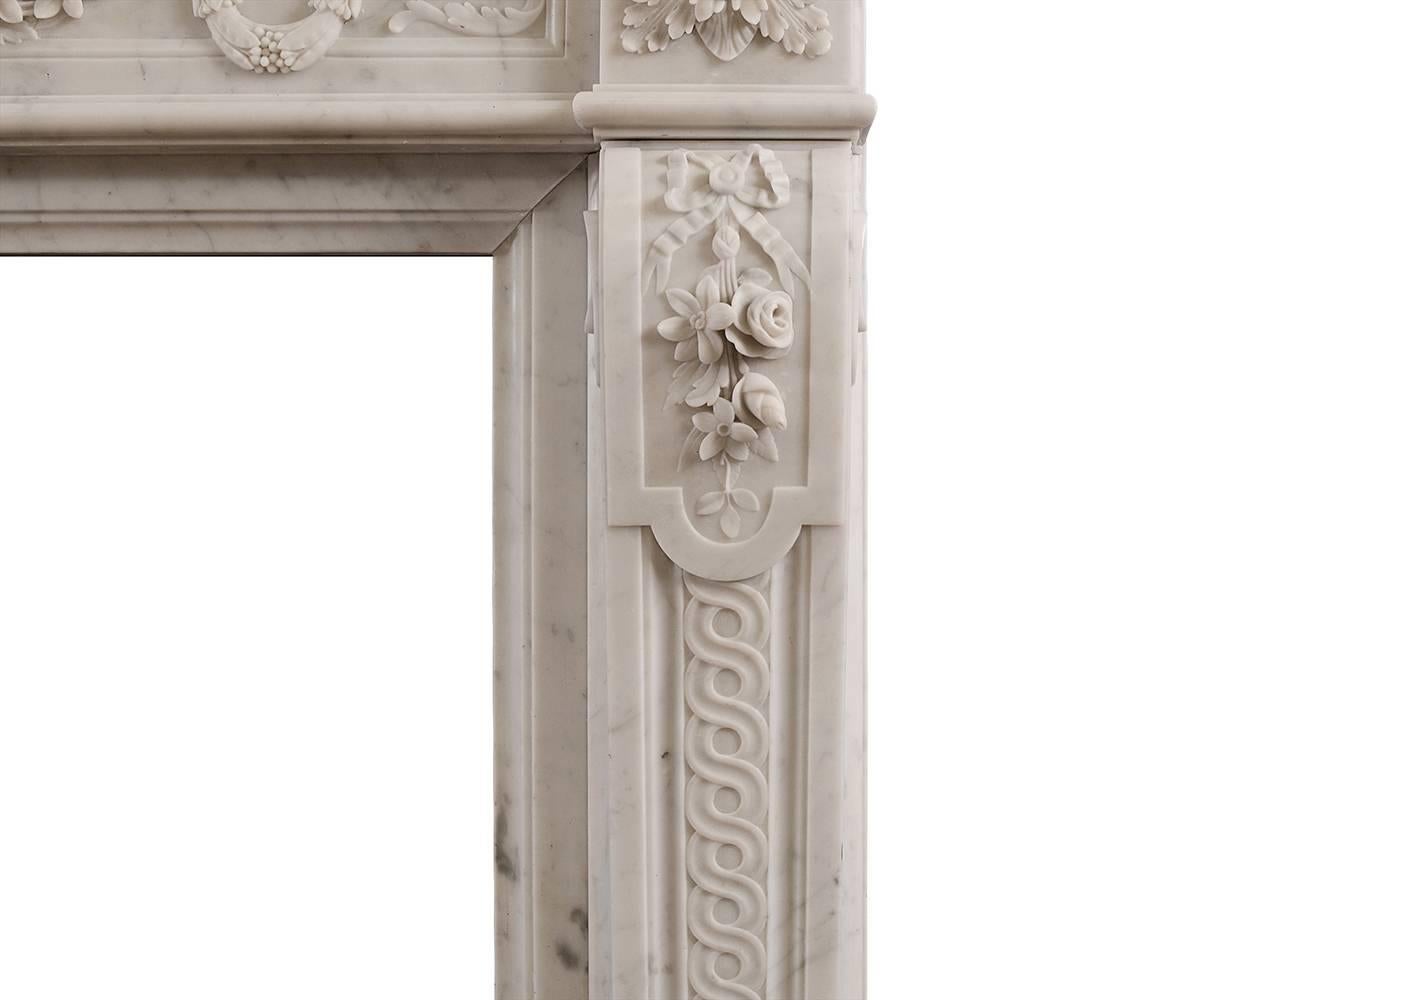 A 19th century French Louis XVI style Carrara marble fireplace. The panelled frieze with torch and quiver to centre, carved wreaths and draped flowers. The scrolled jambs with tied ribbons and foliage with guilloche motif below. The end blocks with